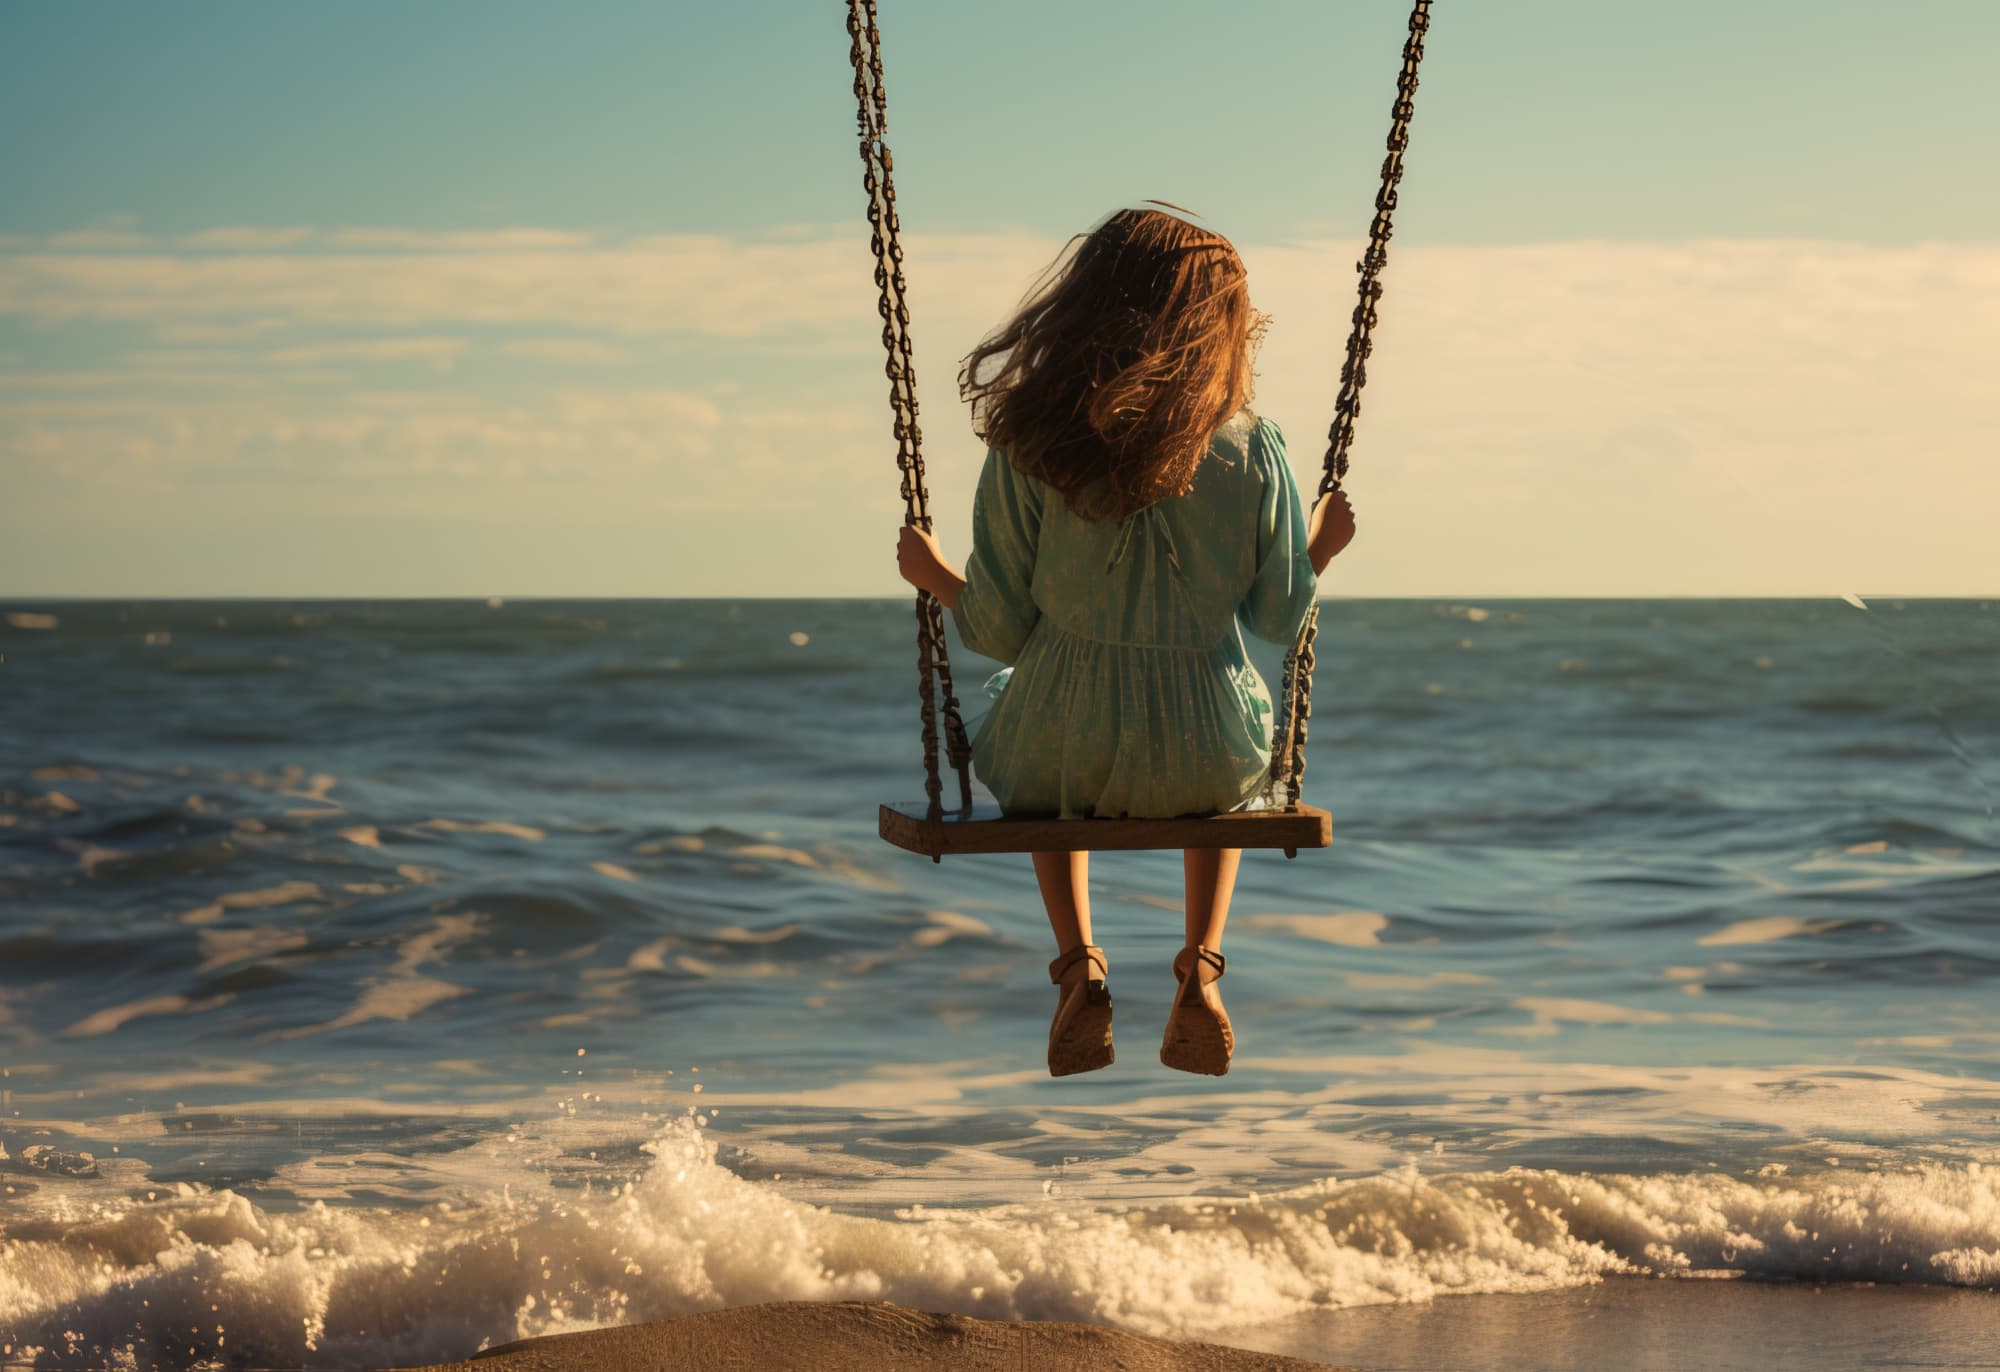 Young girl on a swing by the water's edge.